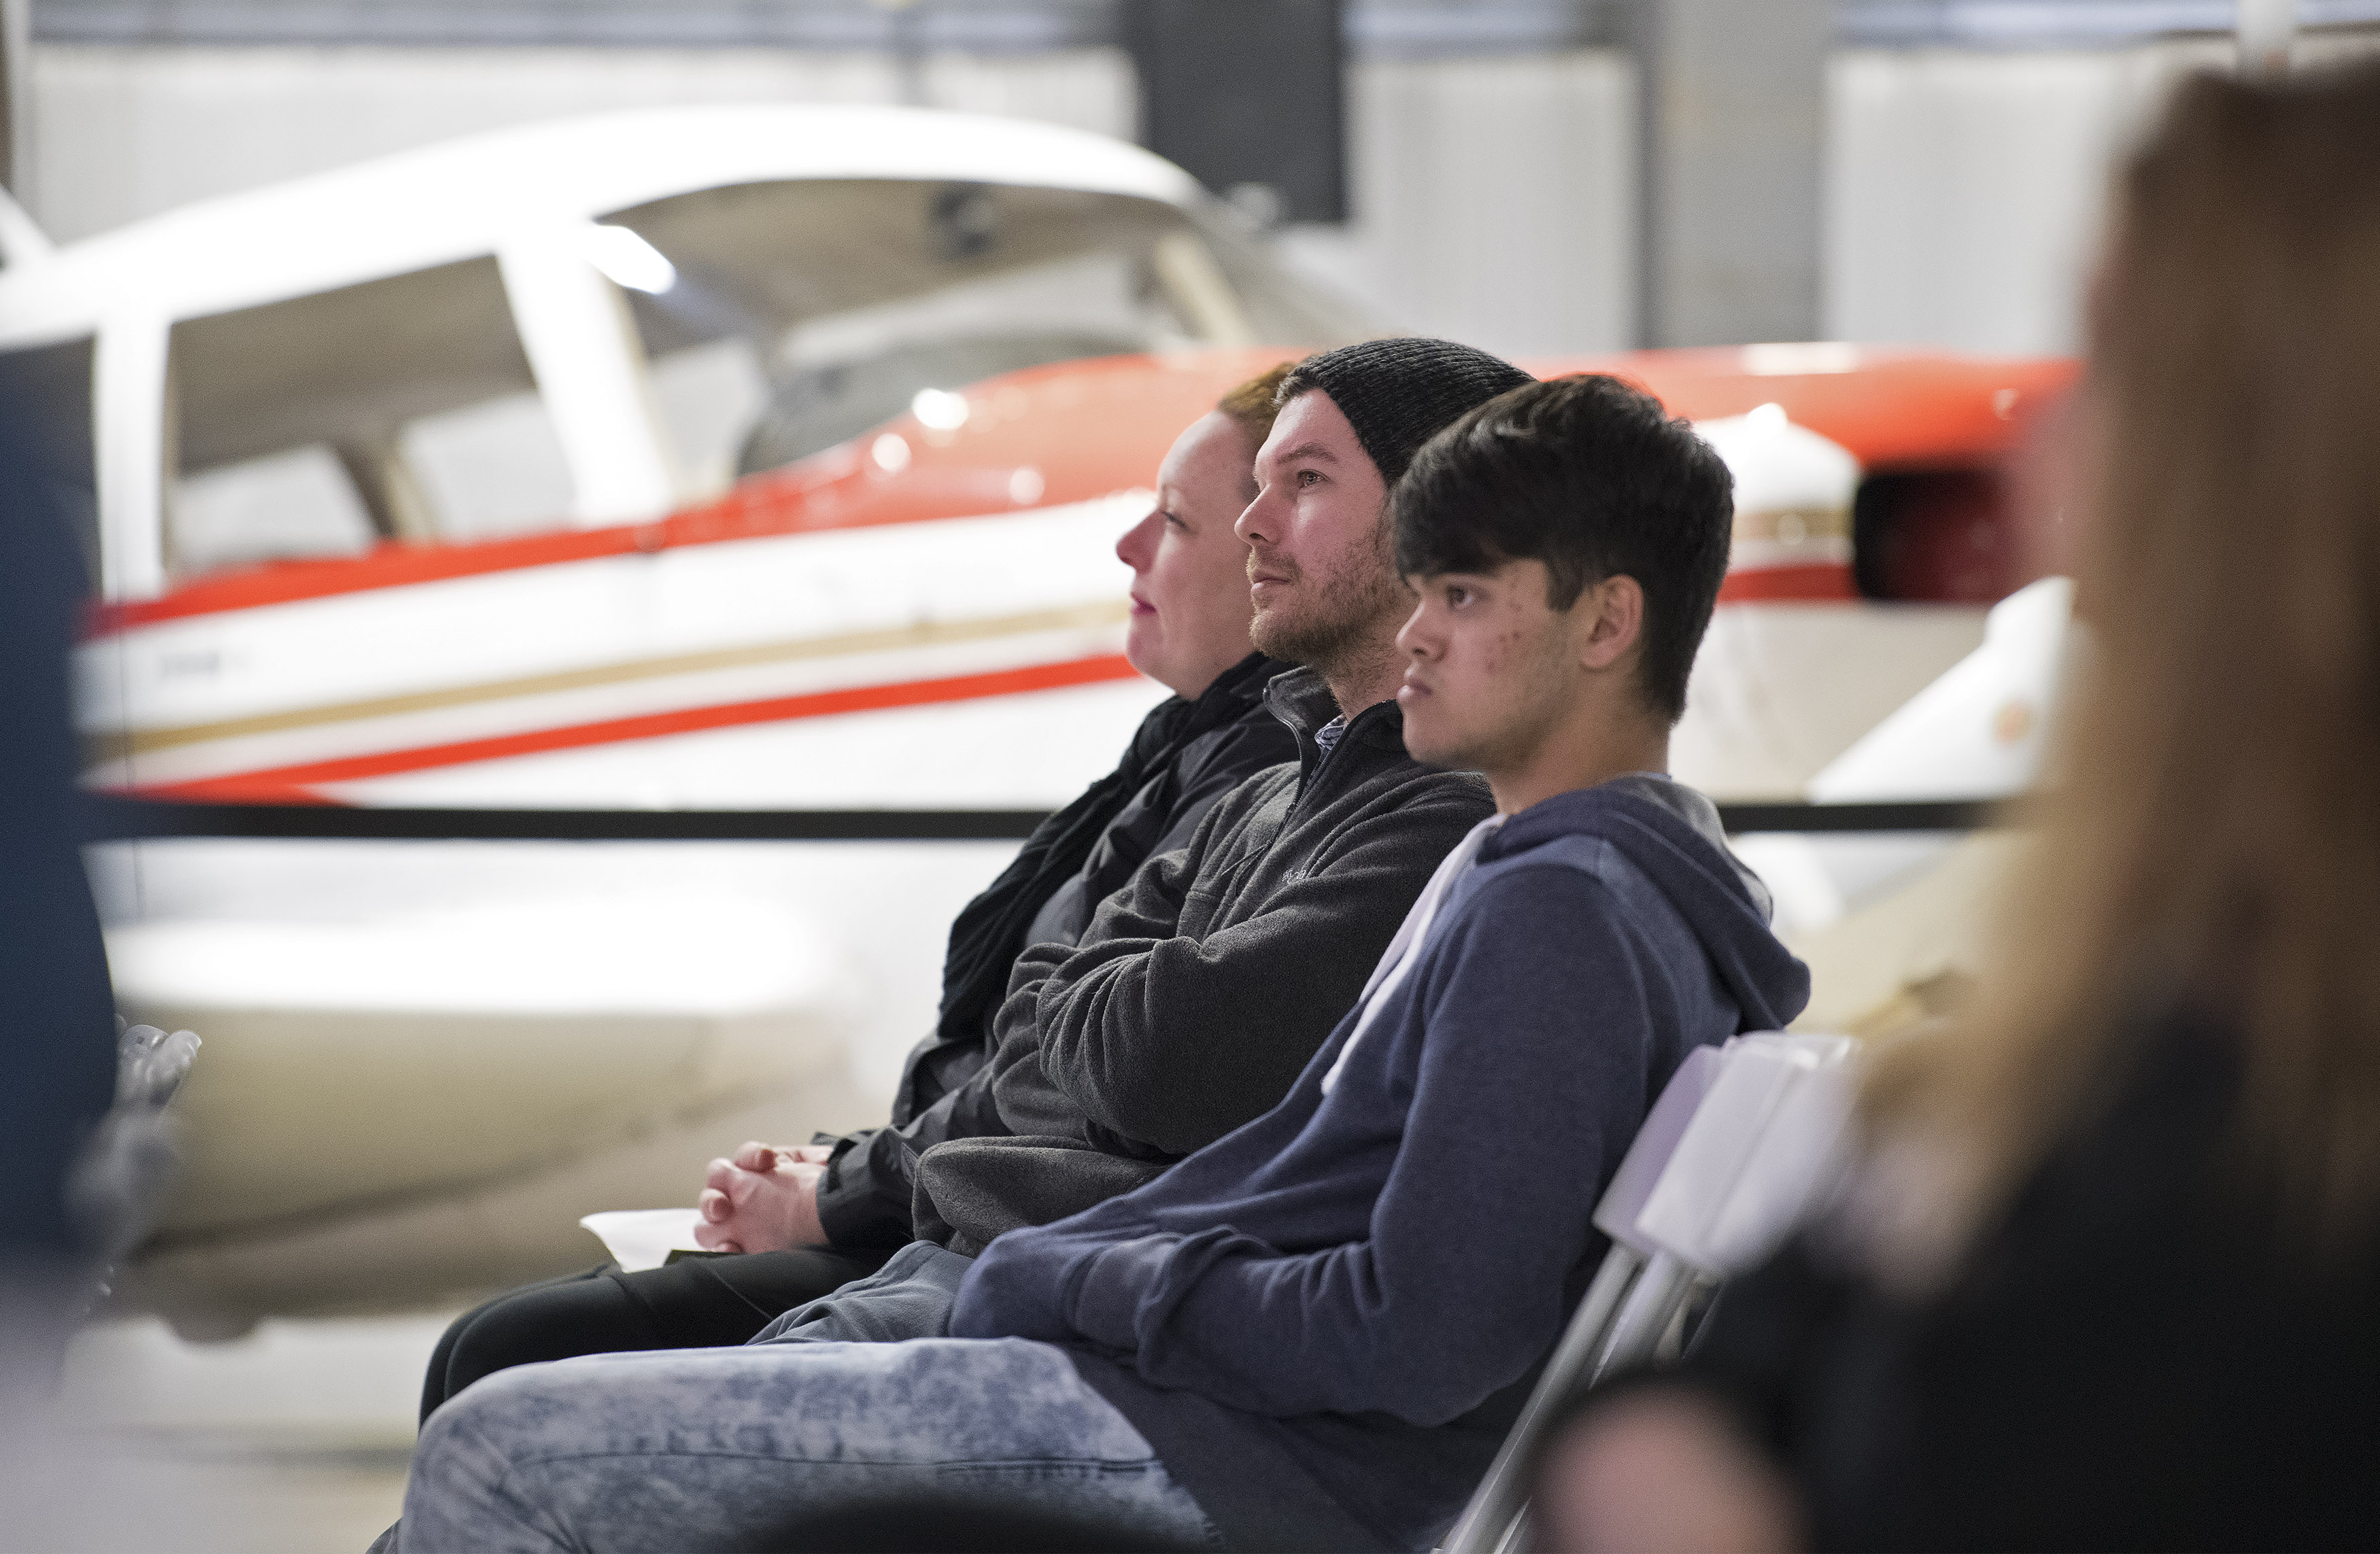 High school students attend a presentation about science, technology, engineering, and math aviation career options during an educational event at Grants Pass Airport, in Grants Pass, Oregon, March 15. Photo by David Tulis.